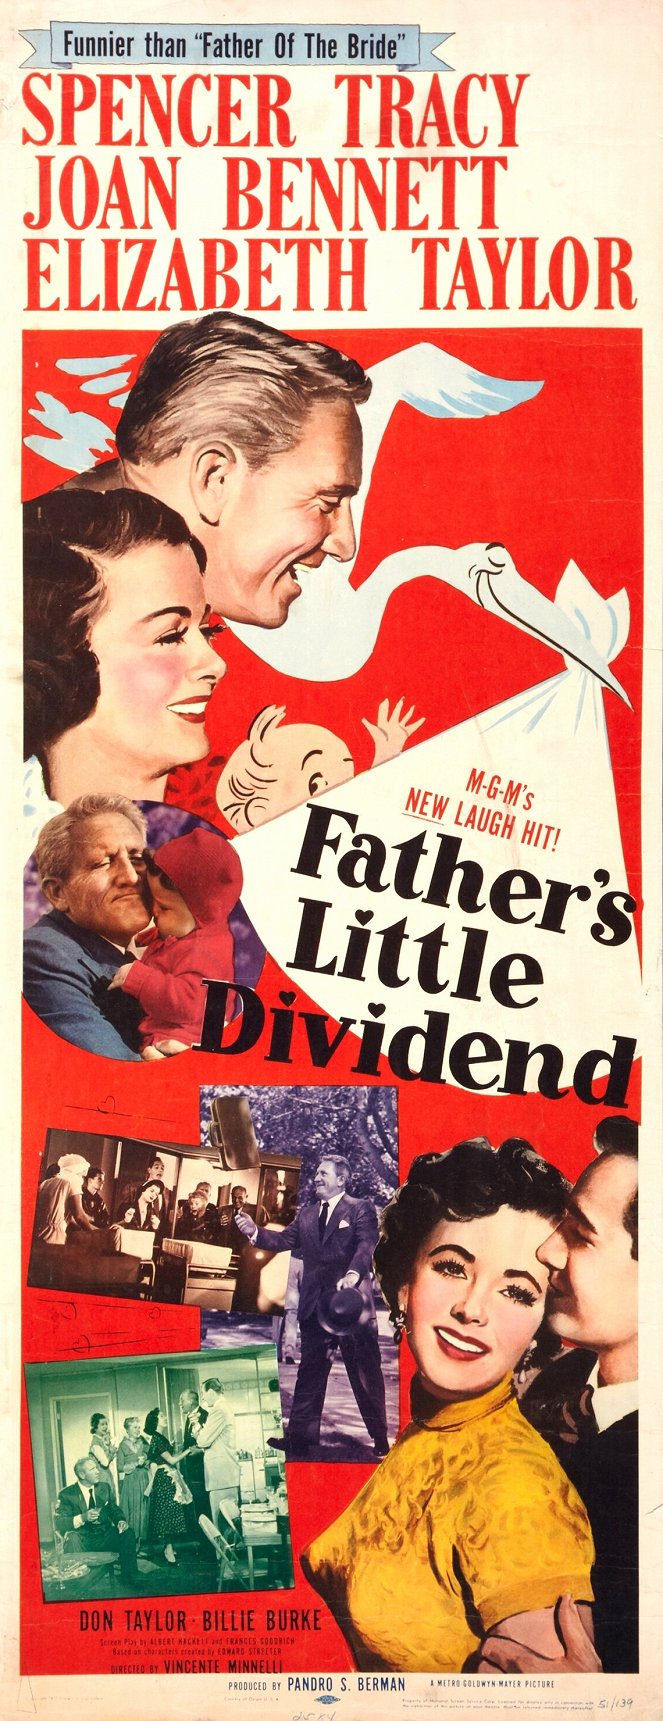 Father's Little Dividend - Posters